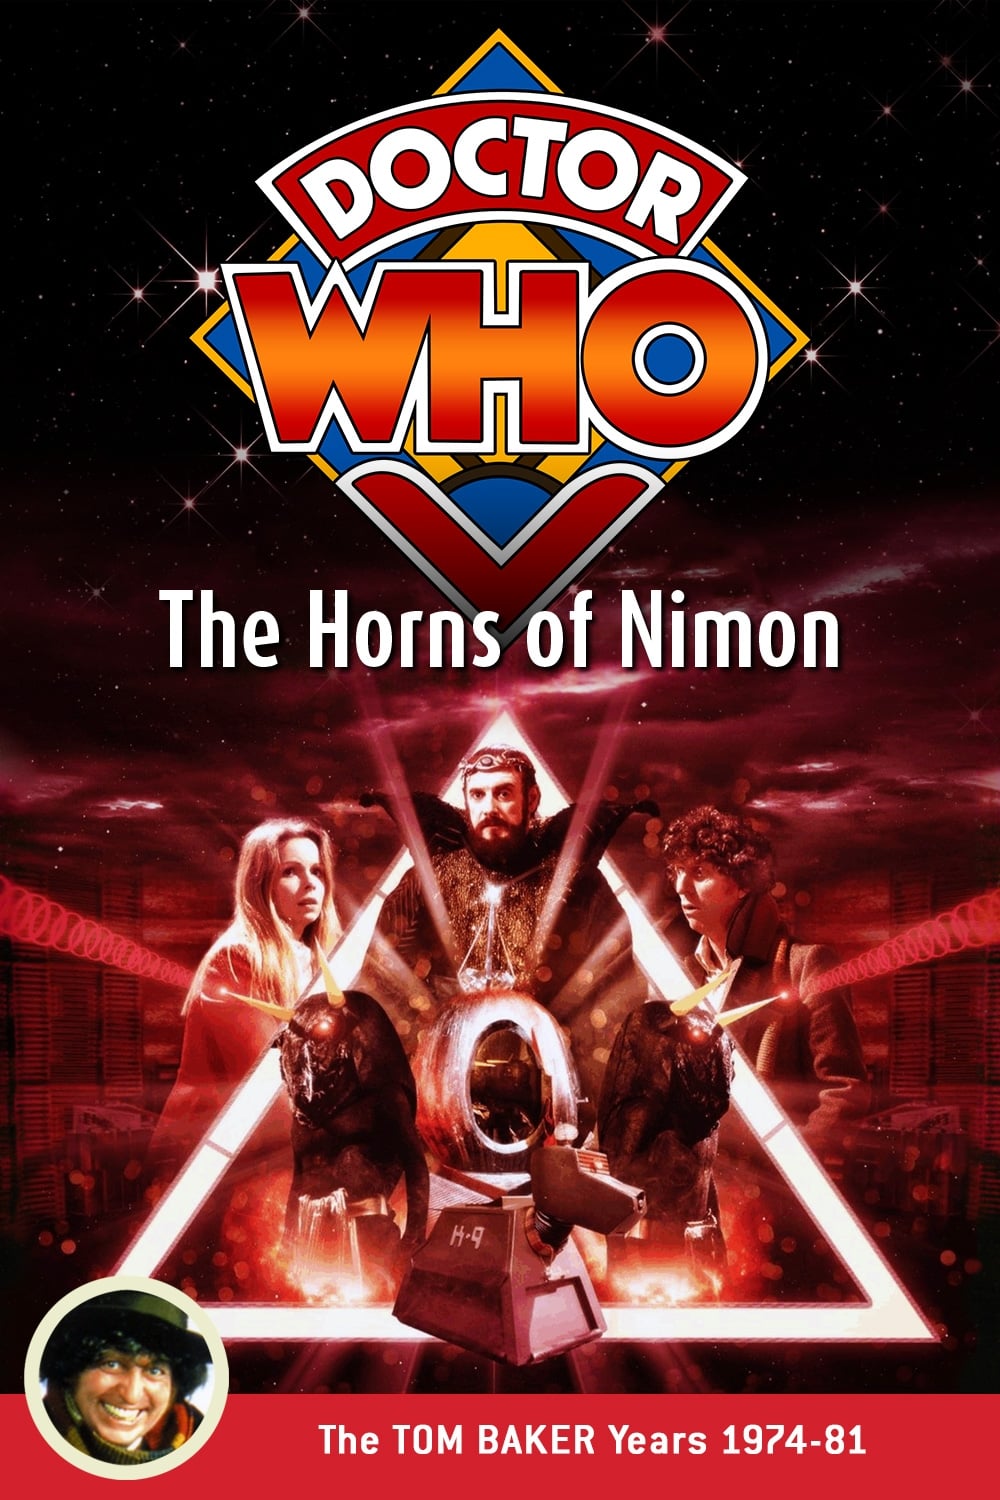 Doctor Who: The Horns of Nimon (1980)